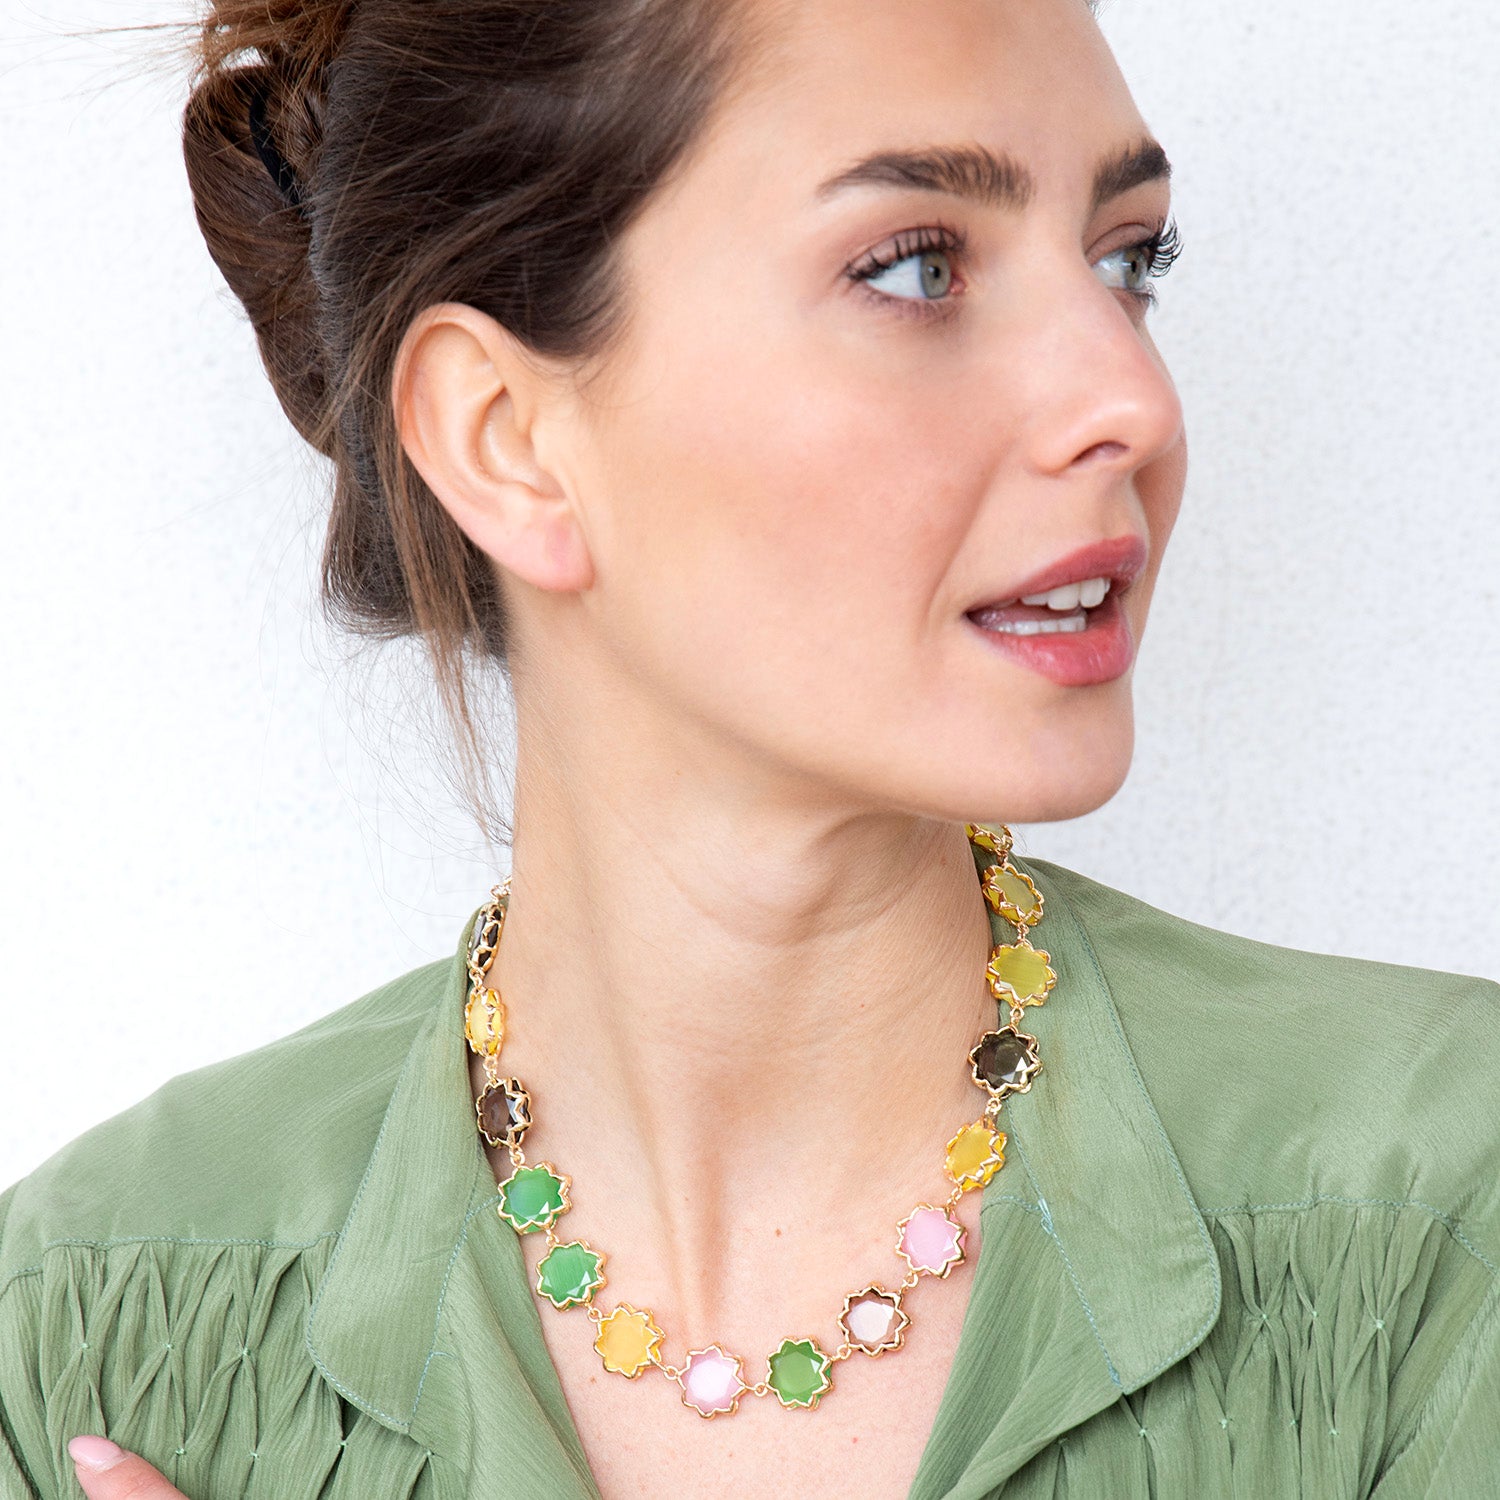 Katerina Psoma Short necklace with colorful beads costume jewelry